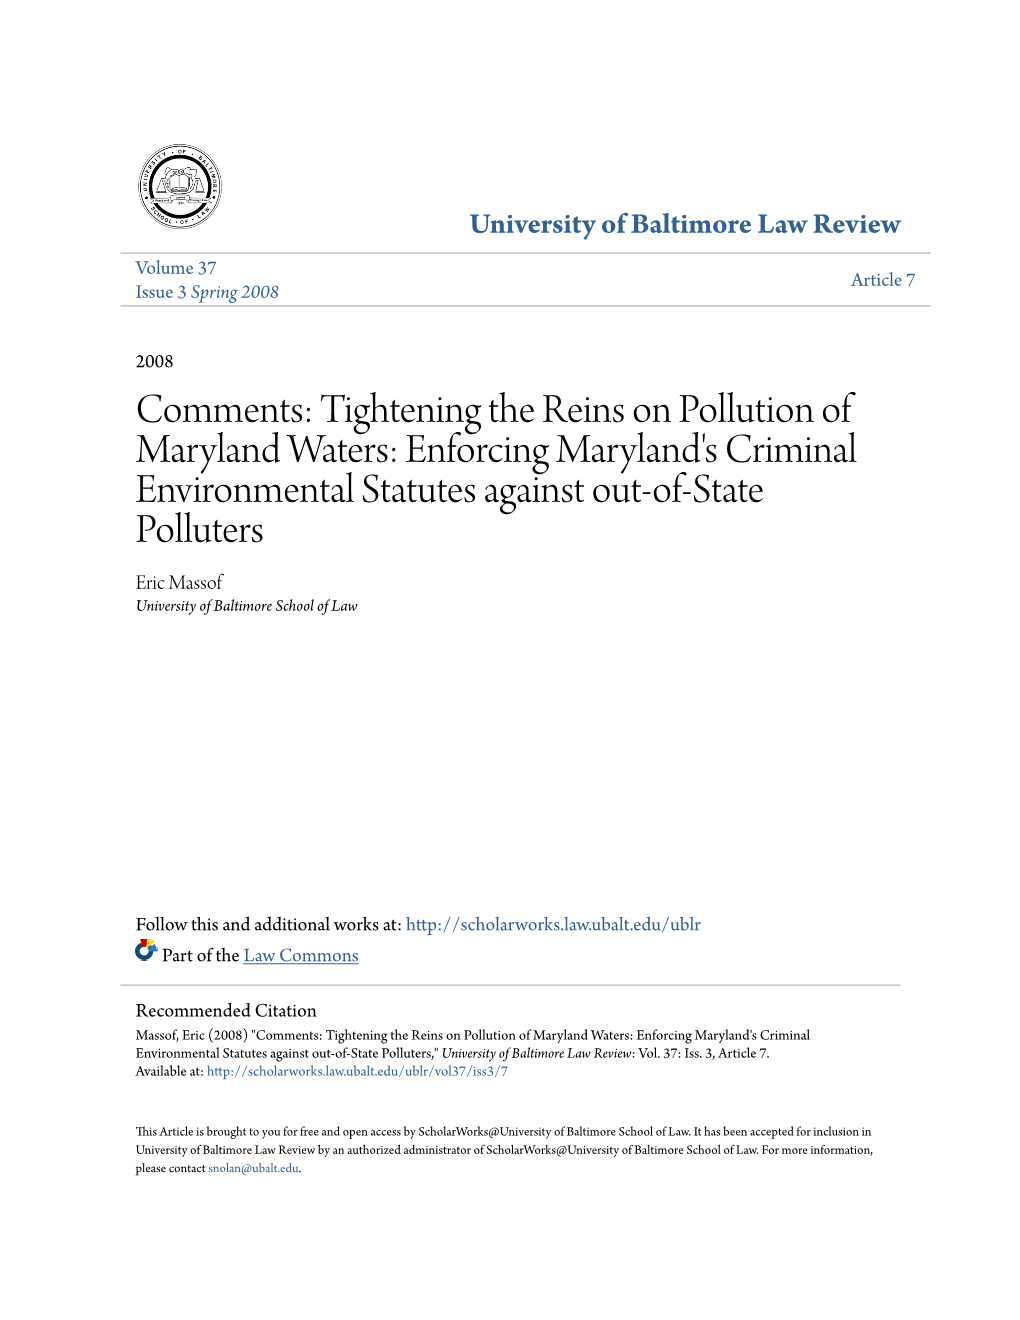 Enforcing Maryland's Criminal Environmental Statutes Against Out-Of-State Polluters Eric Massof University of Baltimore School of Law